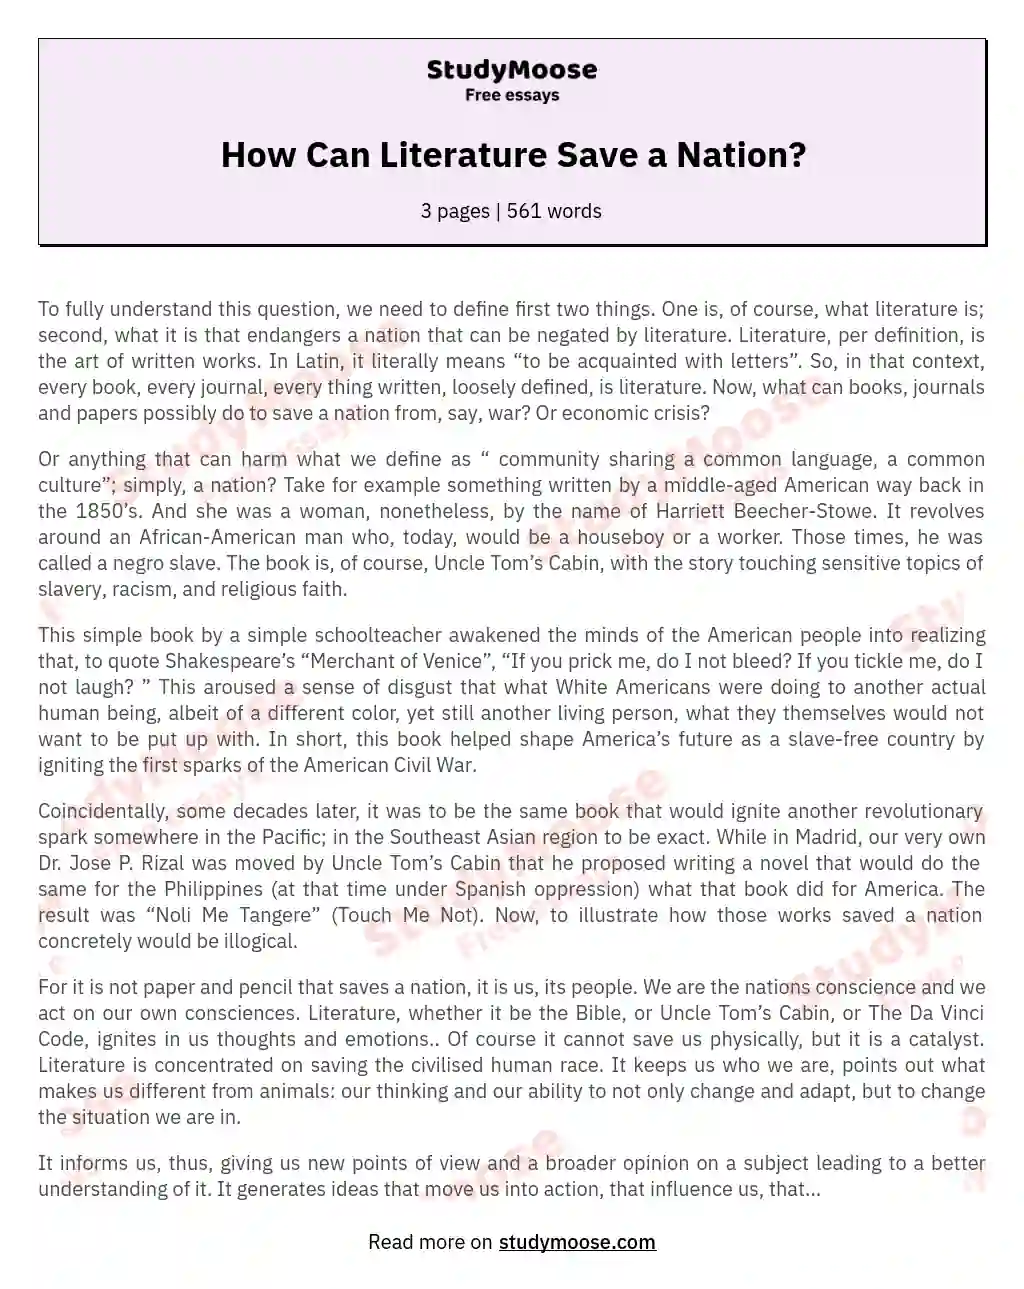 How Can Literature Save a Nation? essay